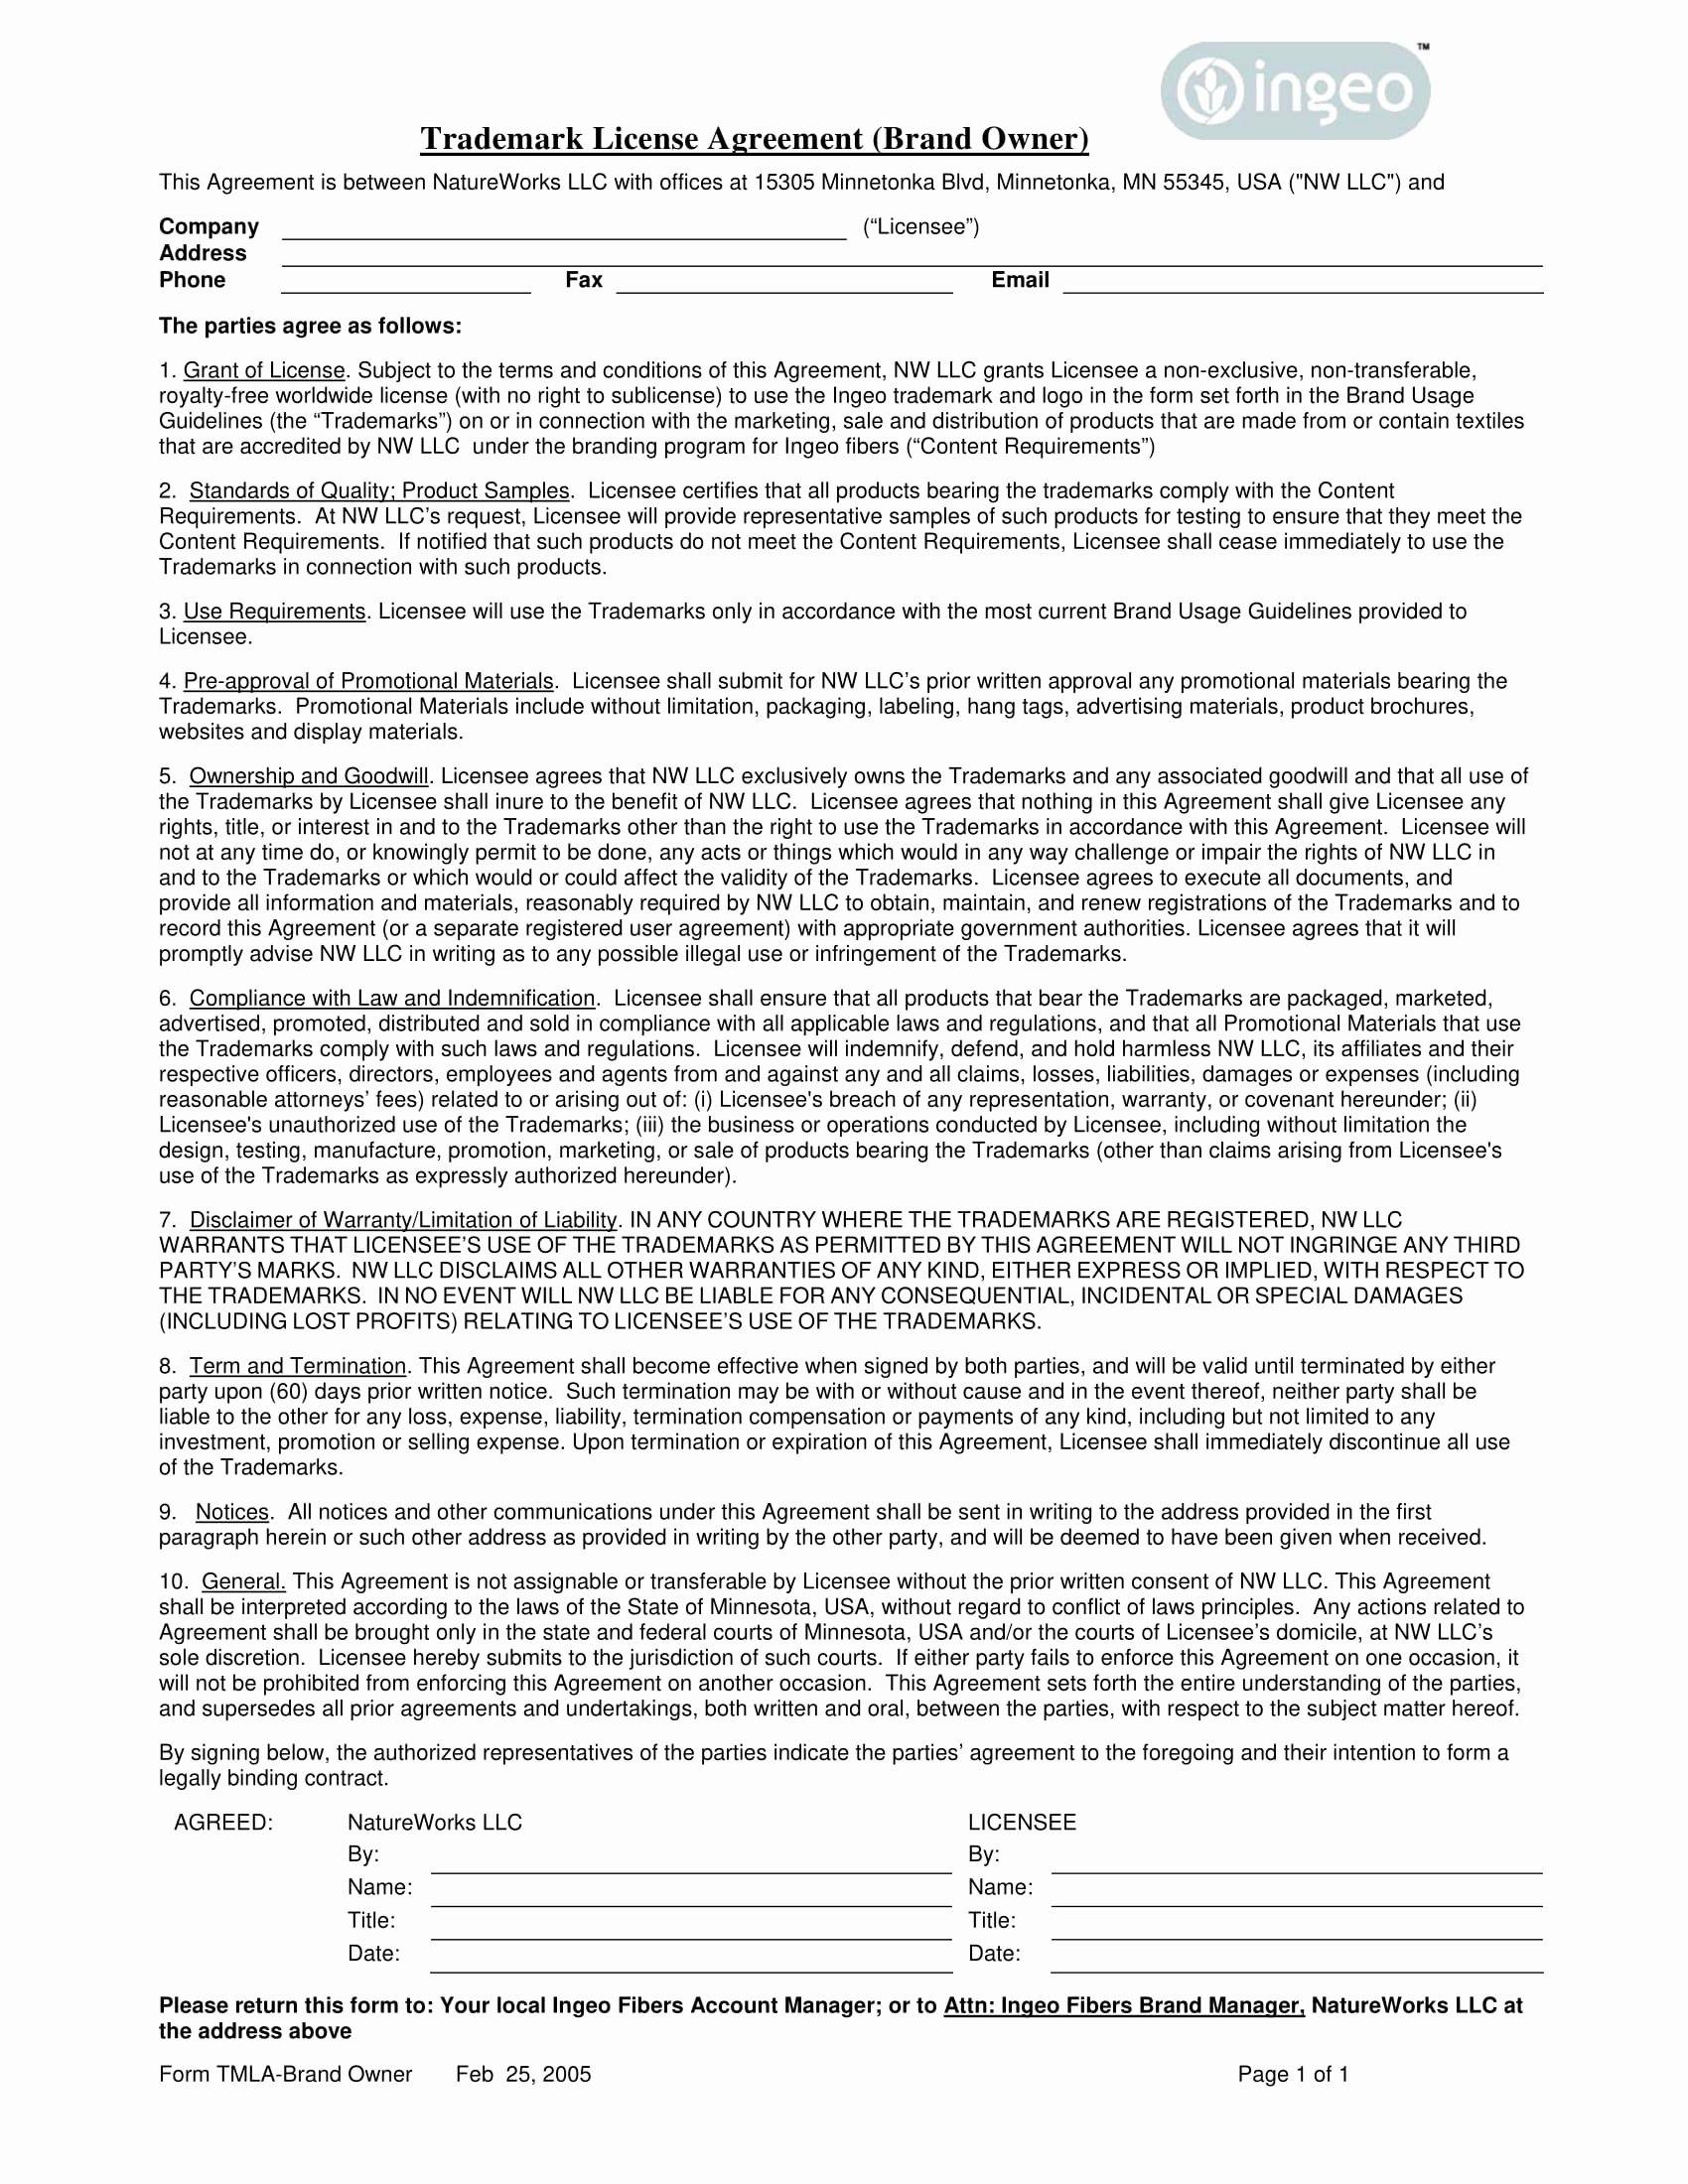 Trademark License Agreement Template Awesome 13 Trademark License Agreement forms Pdf Doc